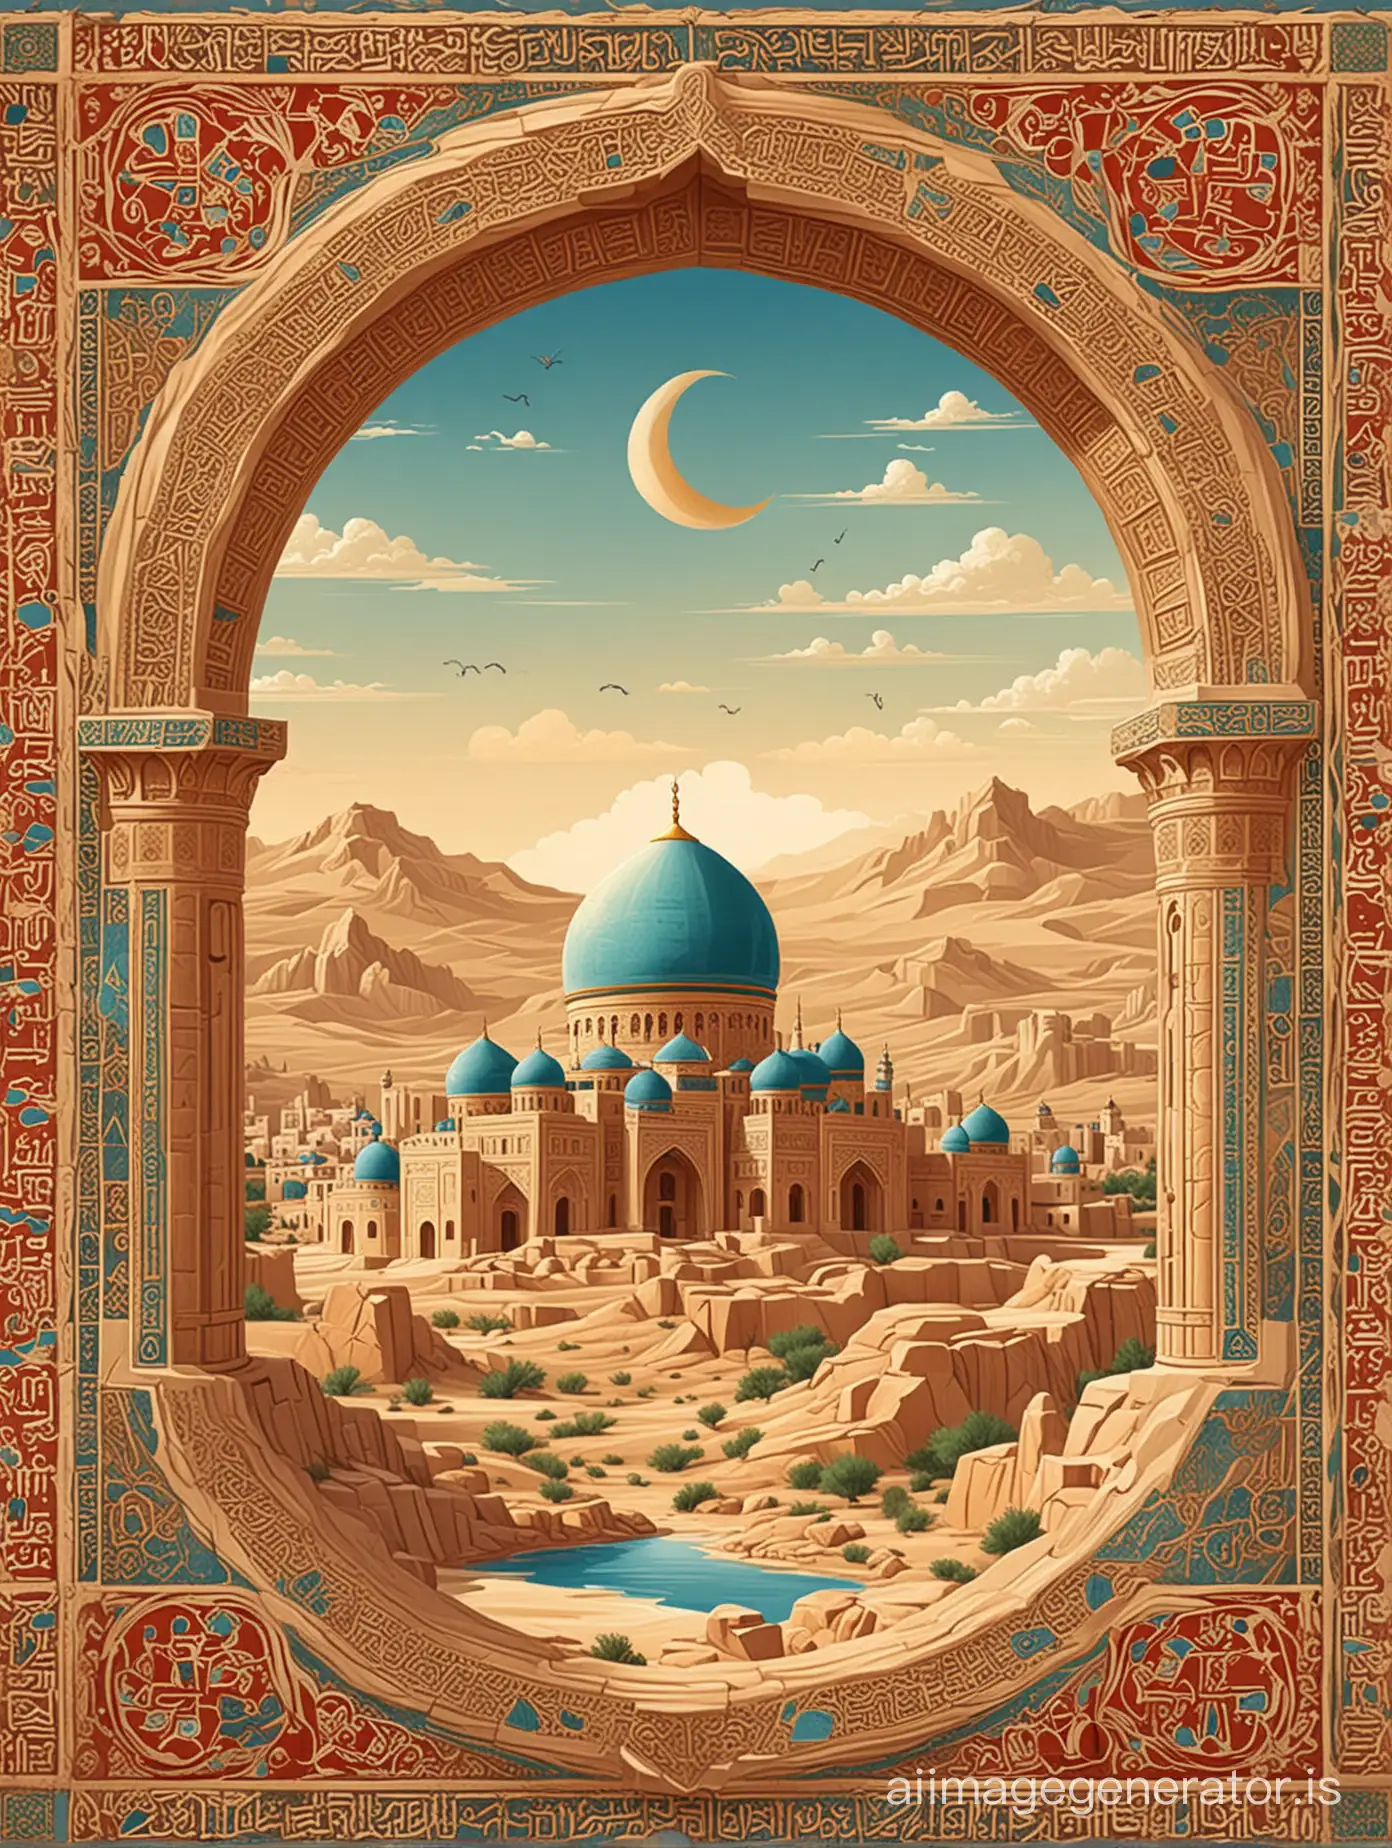 illustration for book cover.  For background, Khorezm historical monuments.  In the ancient oriental style 